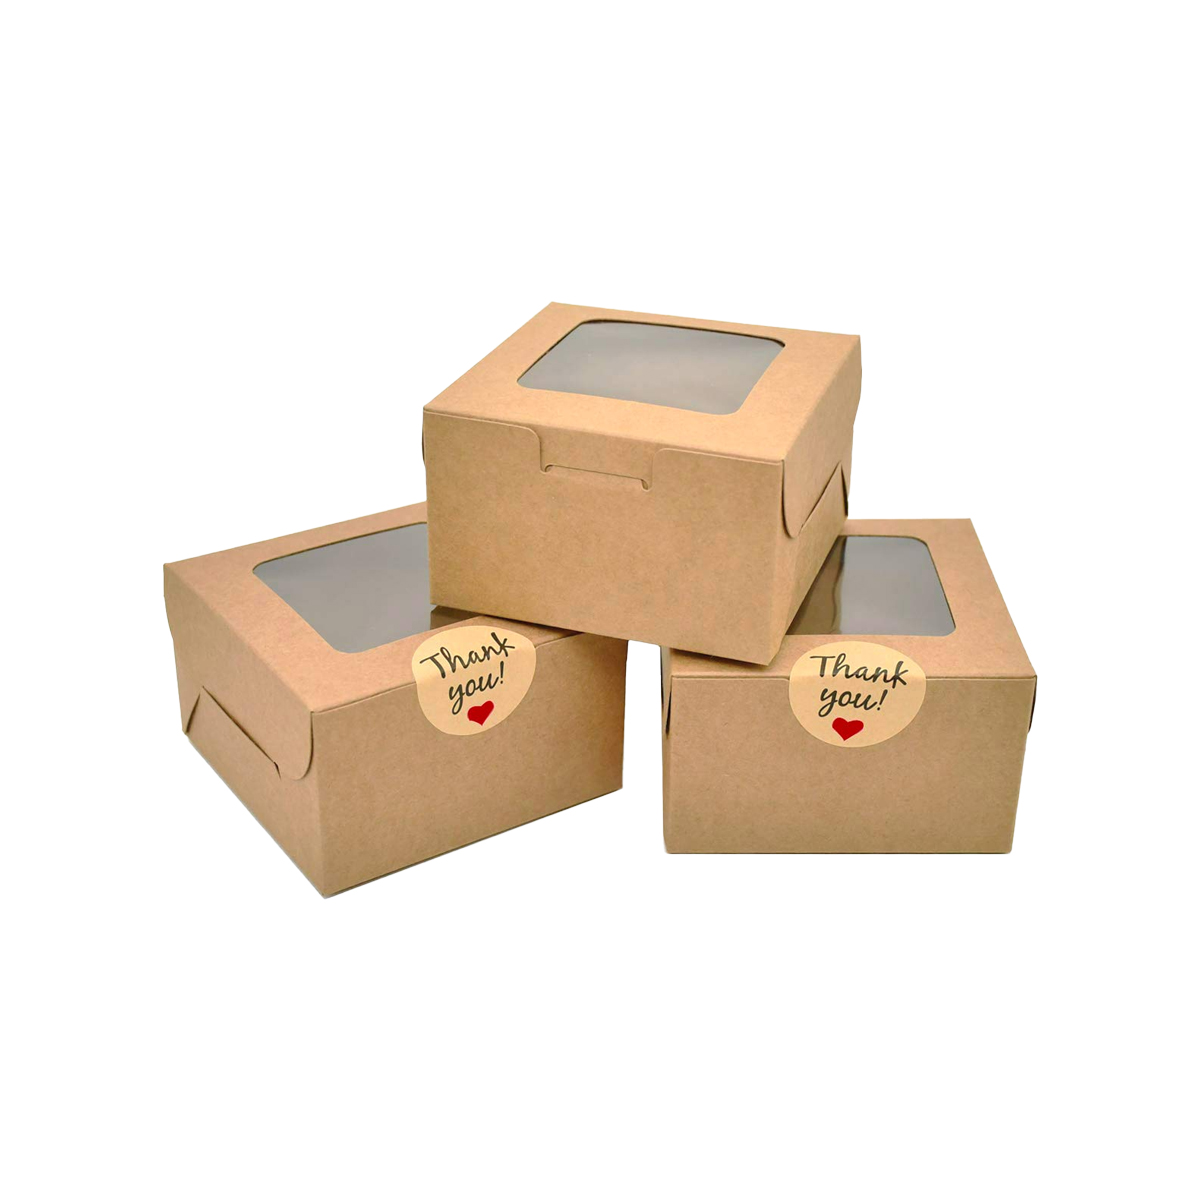 Bakery Boxes and Pastry Boxes